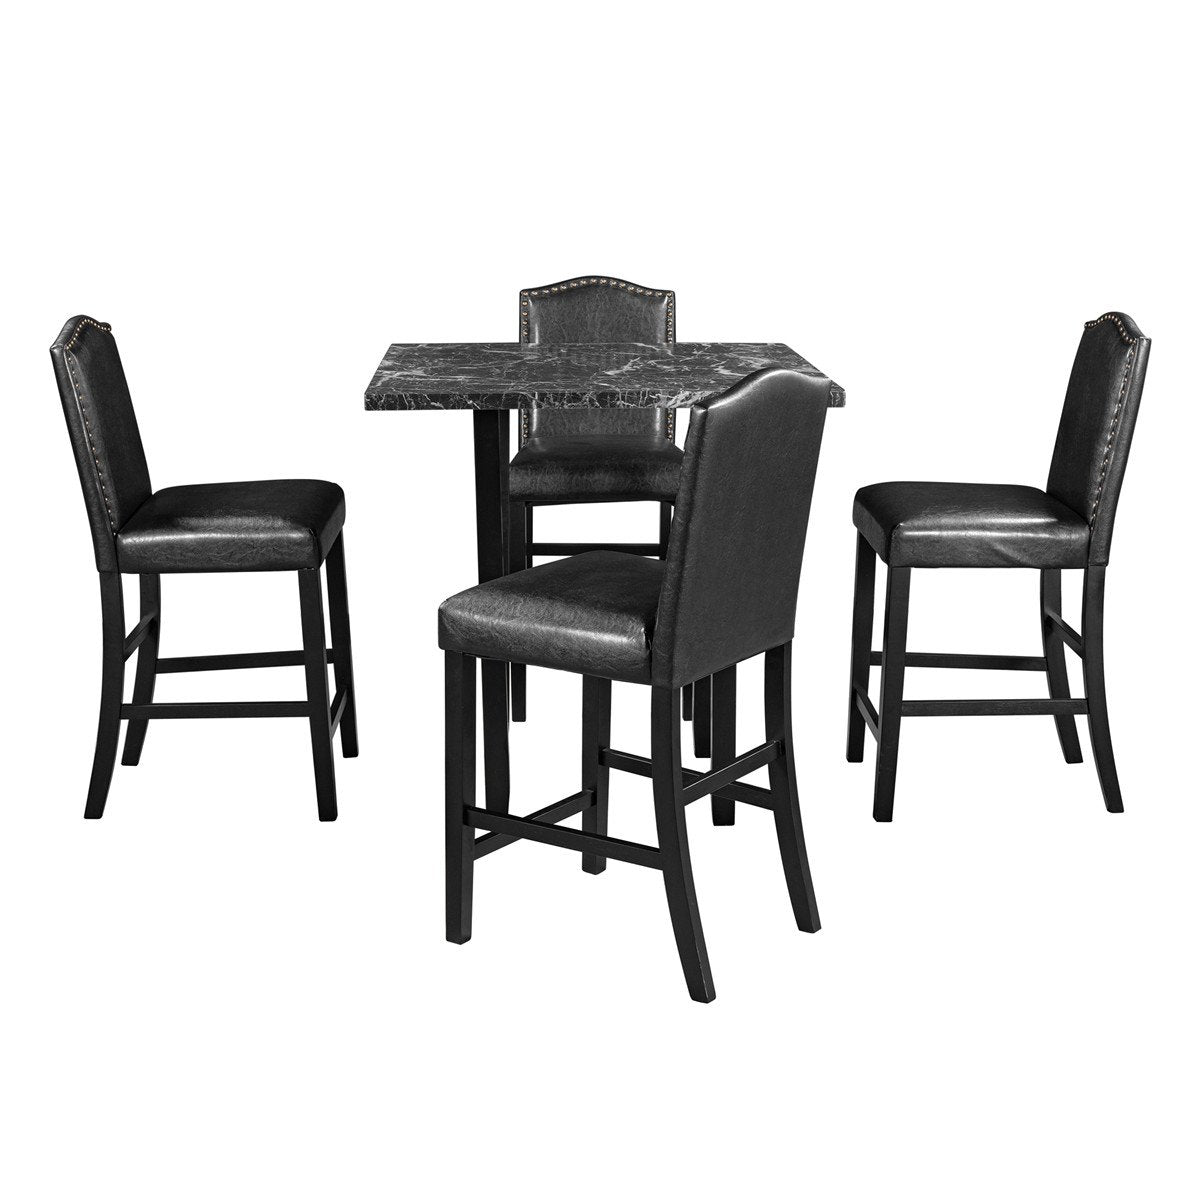 5 Piece Dining Set with Matching Chairs and Bottom Shelf